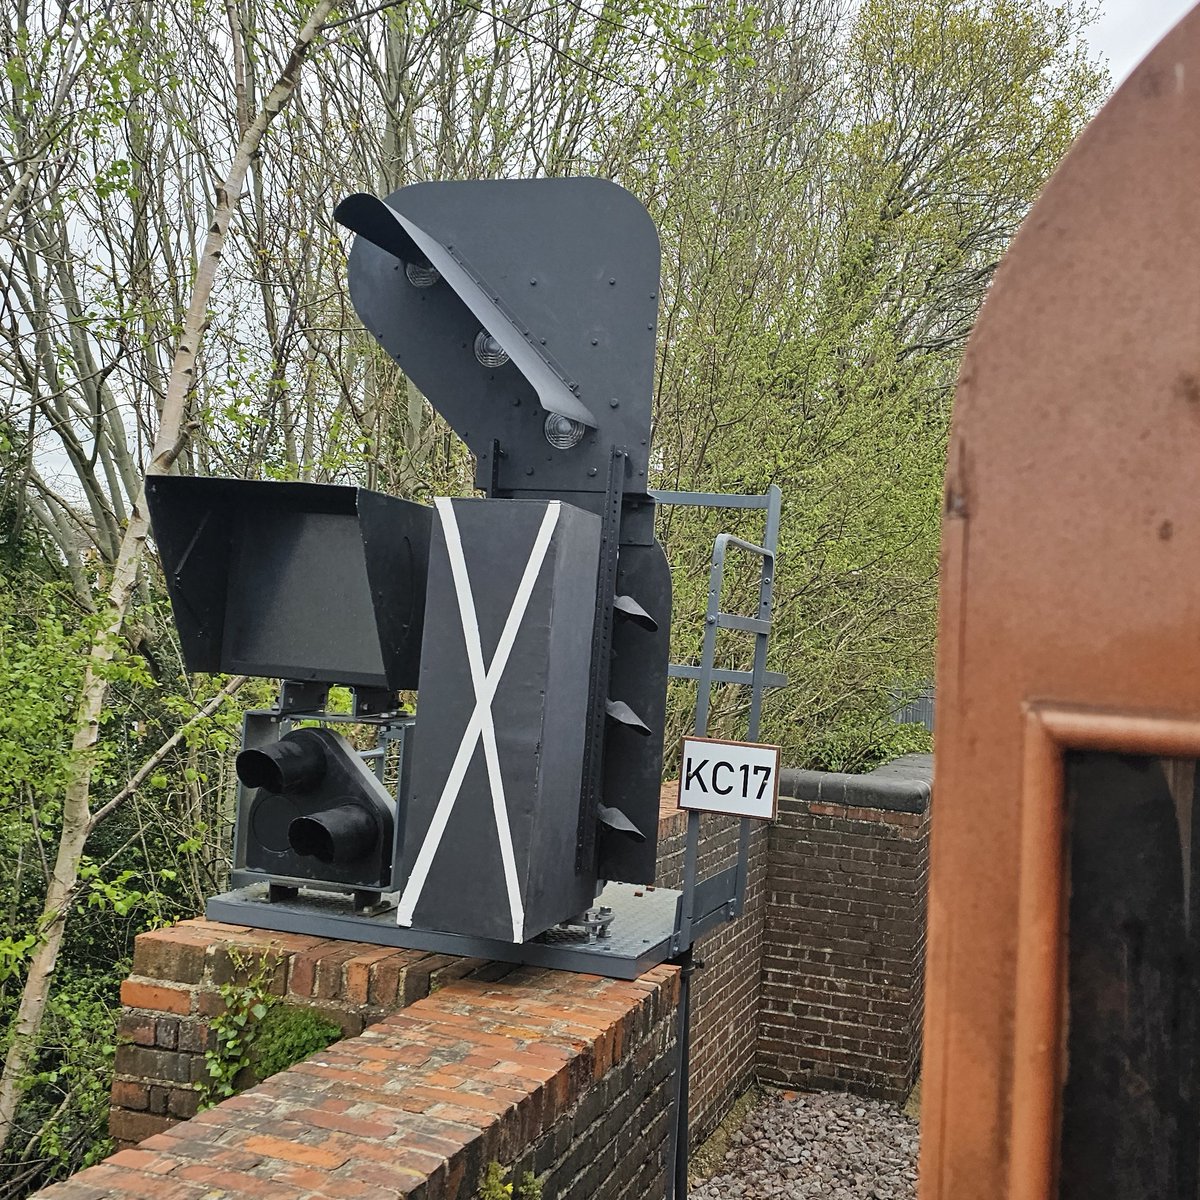 👀 A sign of the future at East Grinstead... 🚦 Signal KC17 will be controlled by Kingscote Signal Box and give access to the Bluebell Railway Platform and the Mainline Platforms, which are controlled by Oxted Signal Box. #railwayfamily #railway #trains